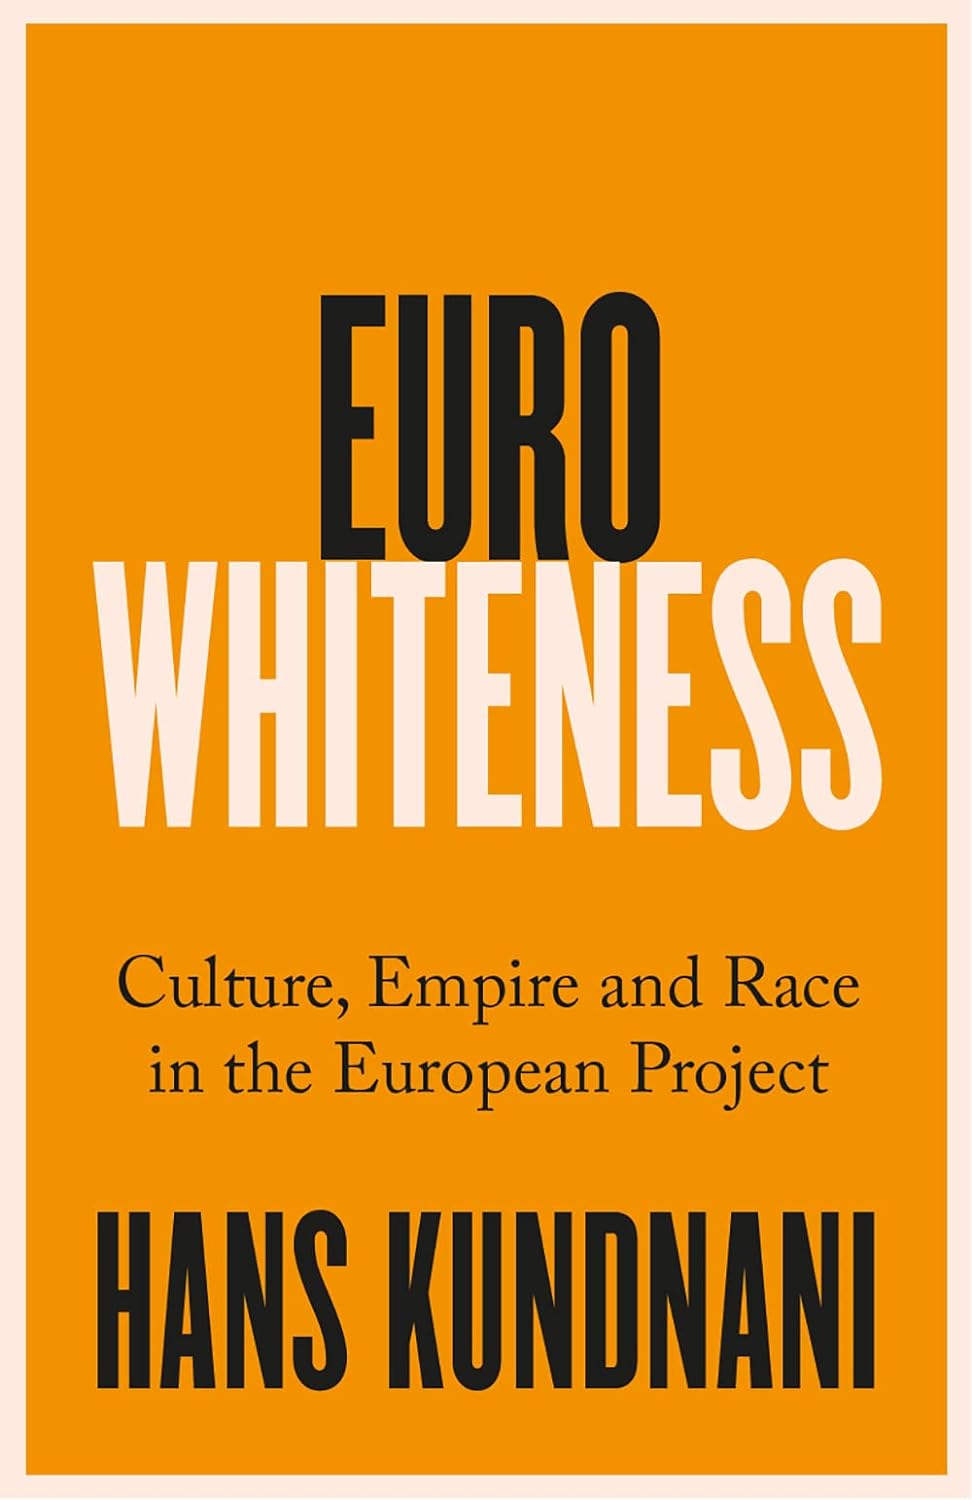 Eurowhiteness: Culture, empire and race in the European project